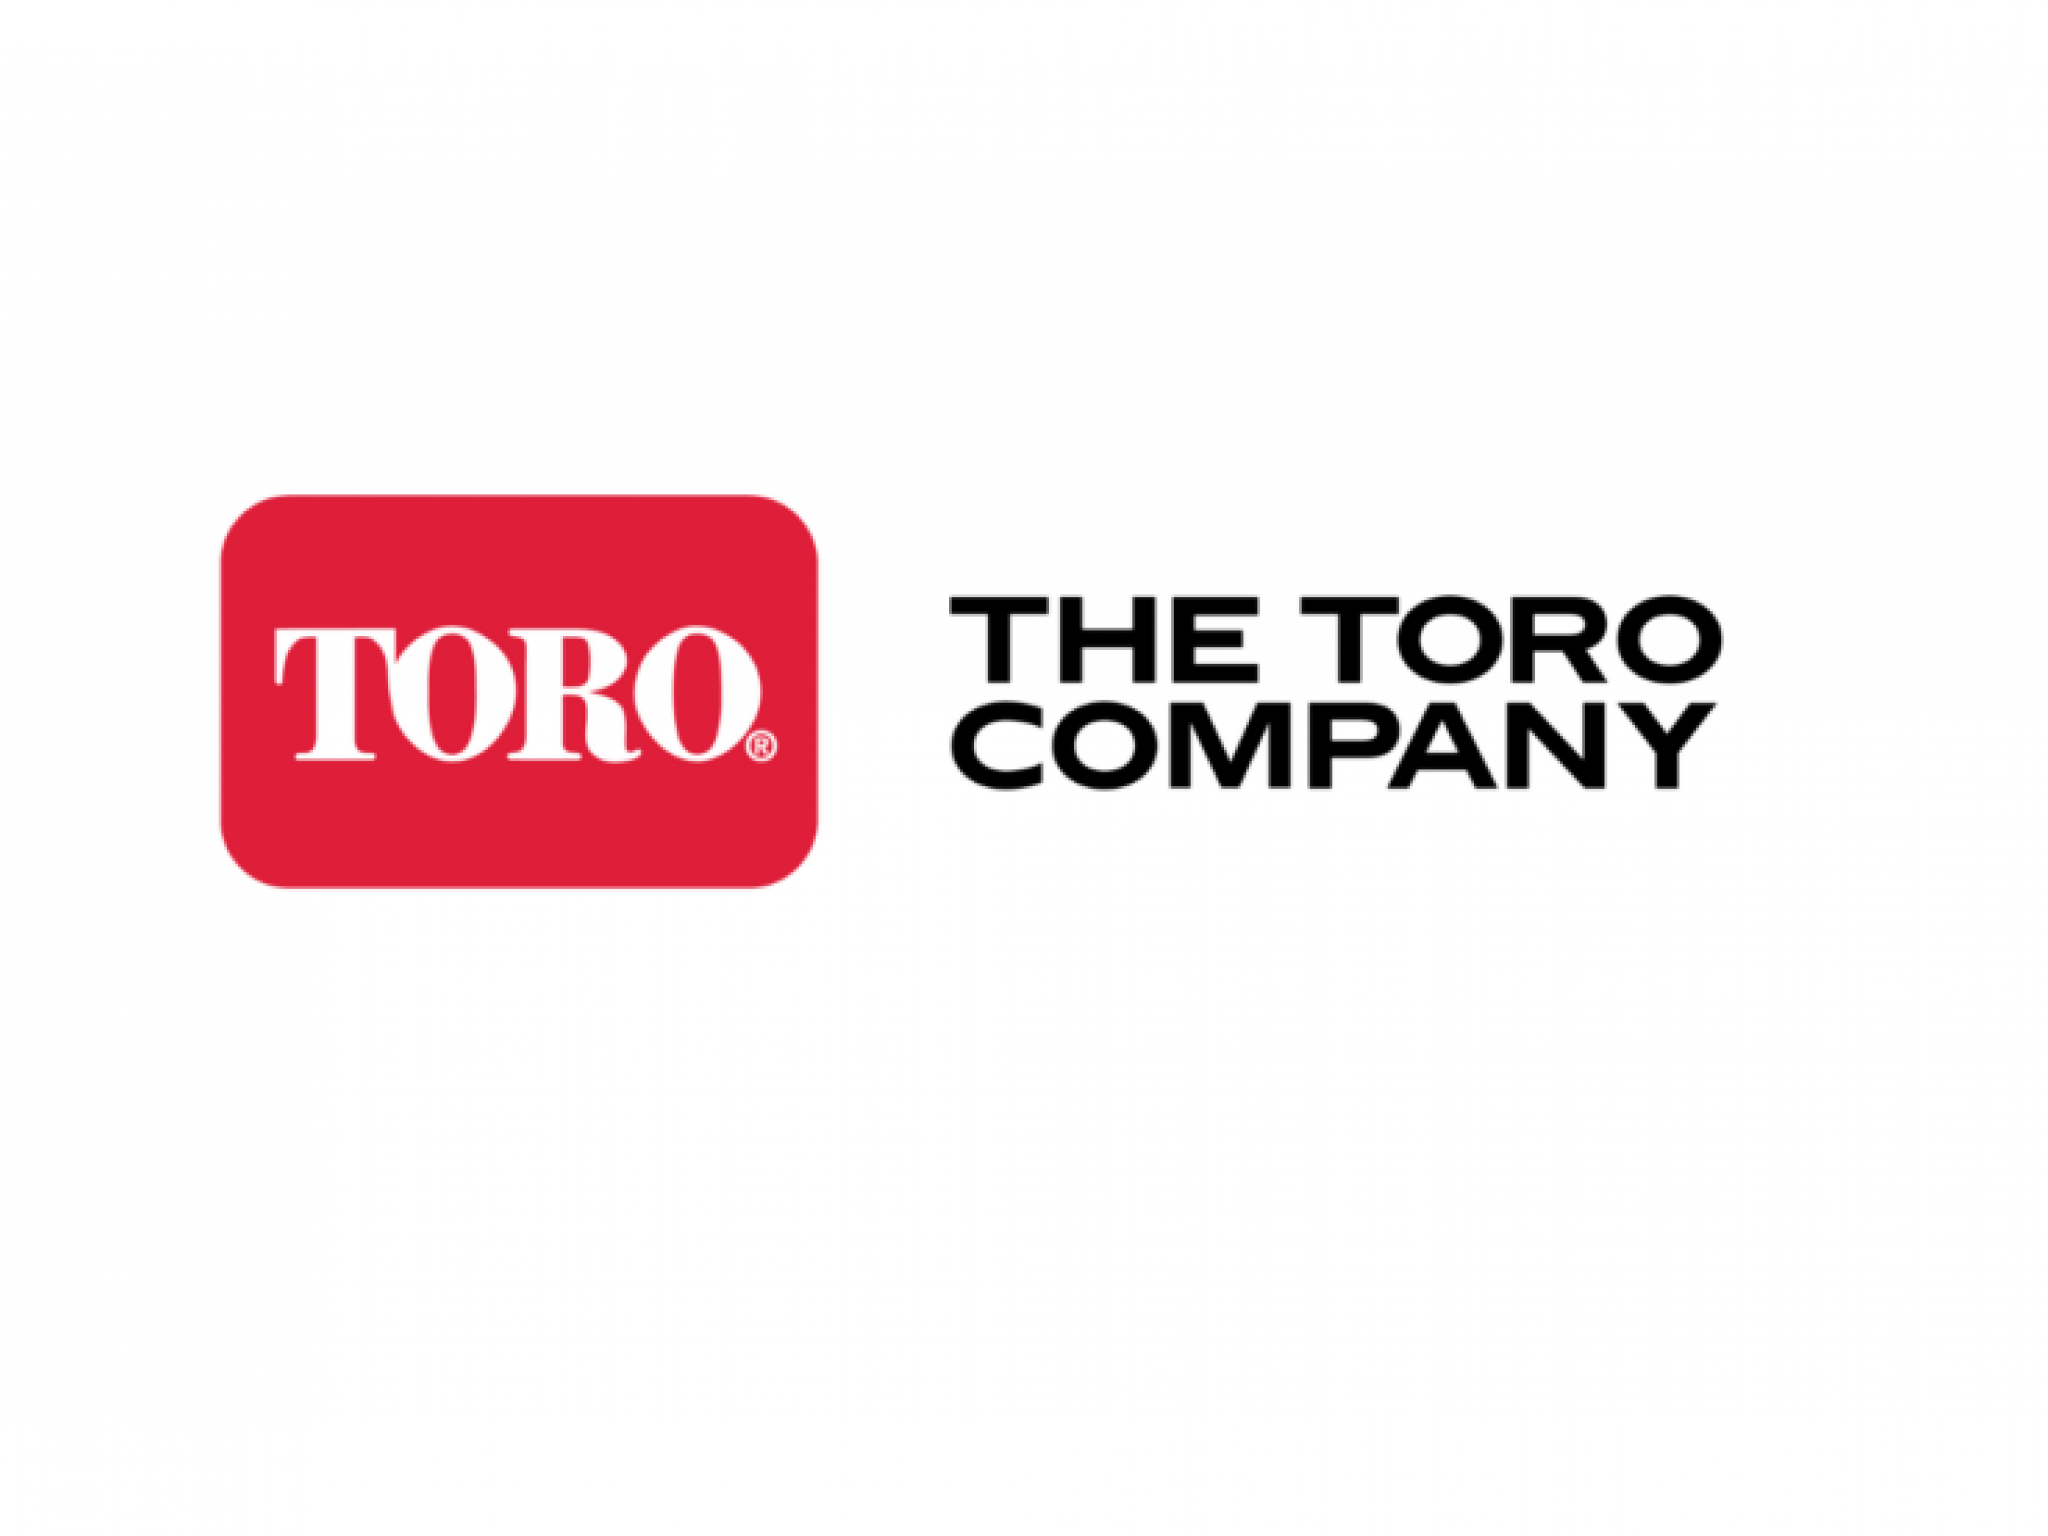  why-outdoor-equipment-products-provider-toro-shares-are-surging-today 